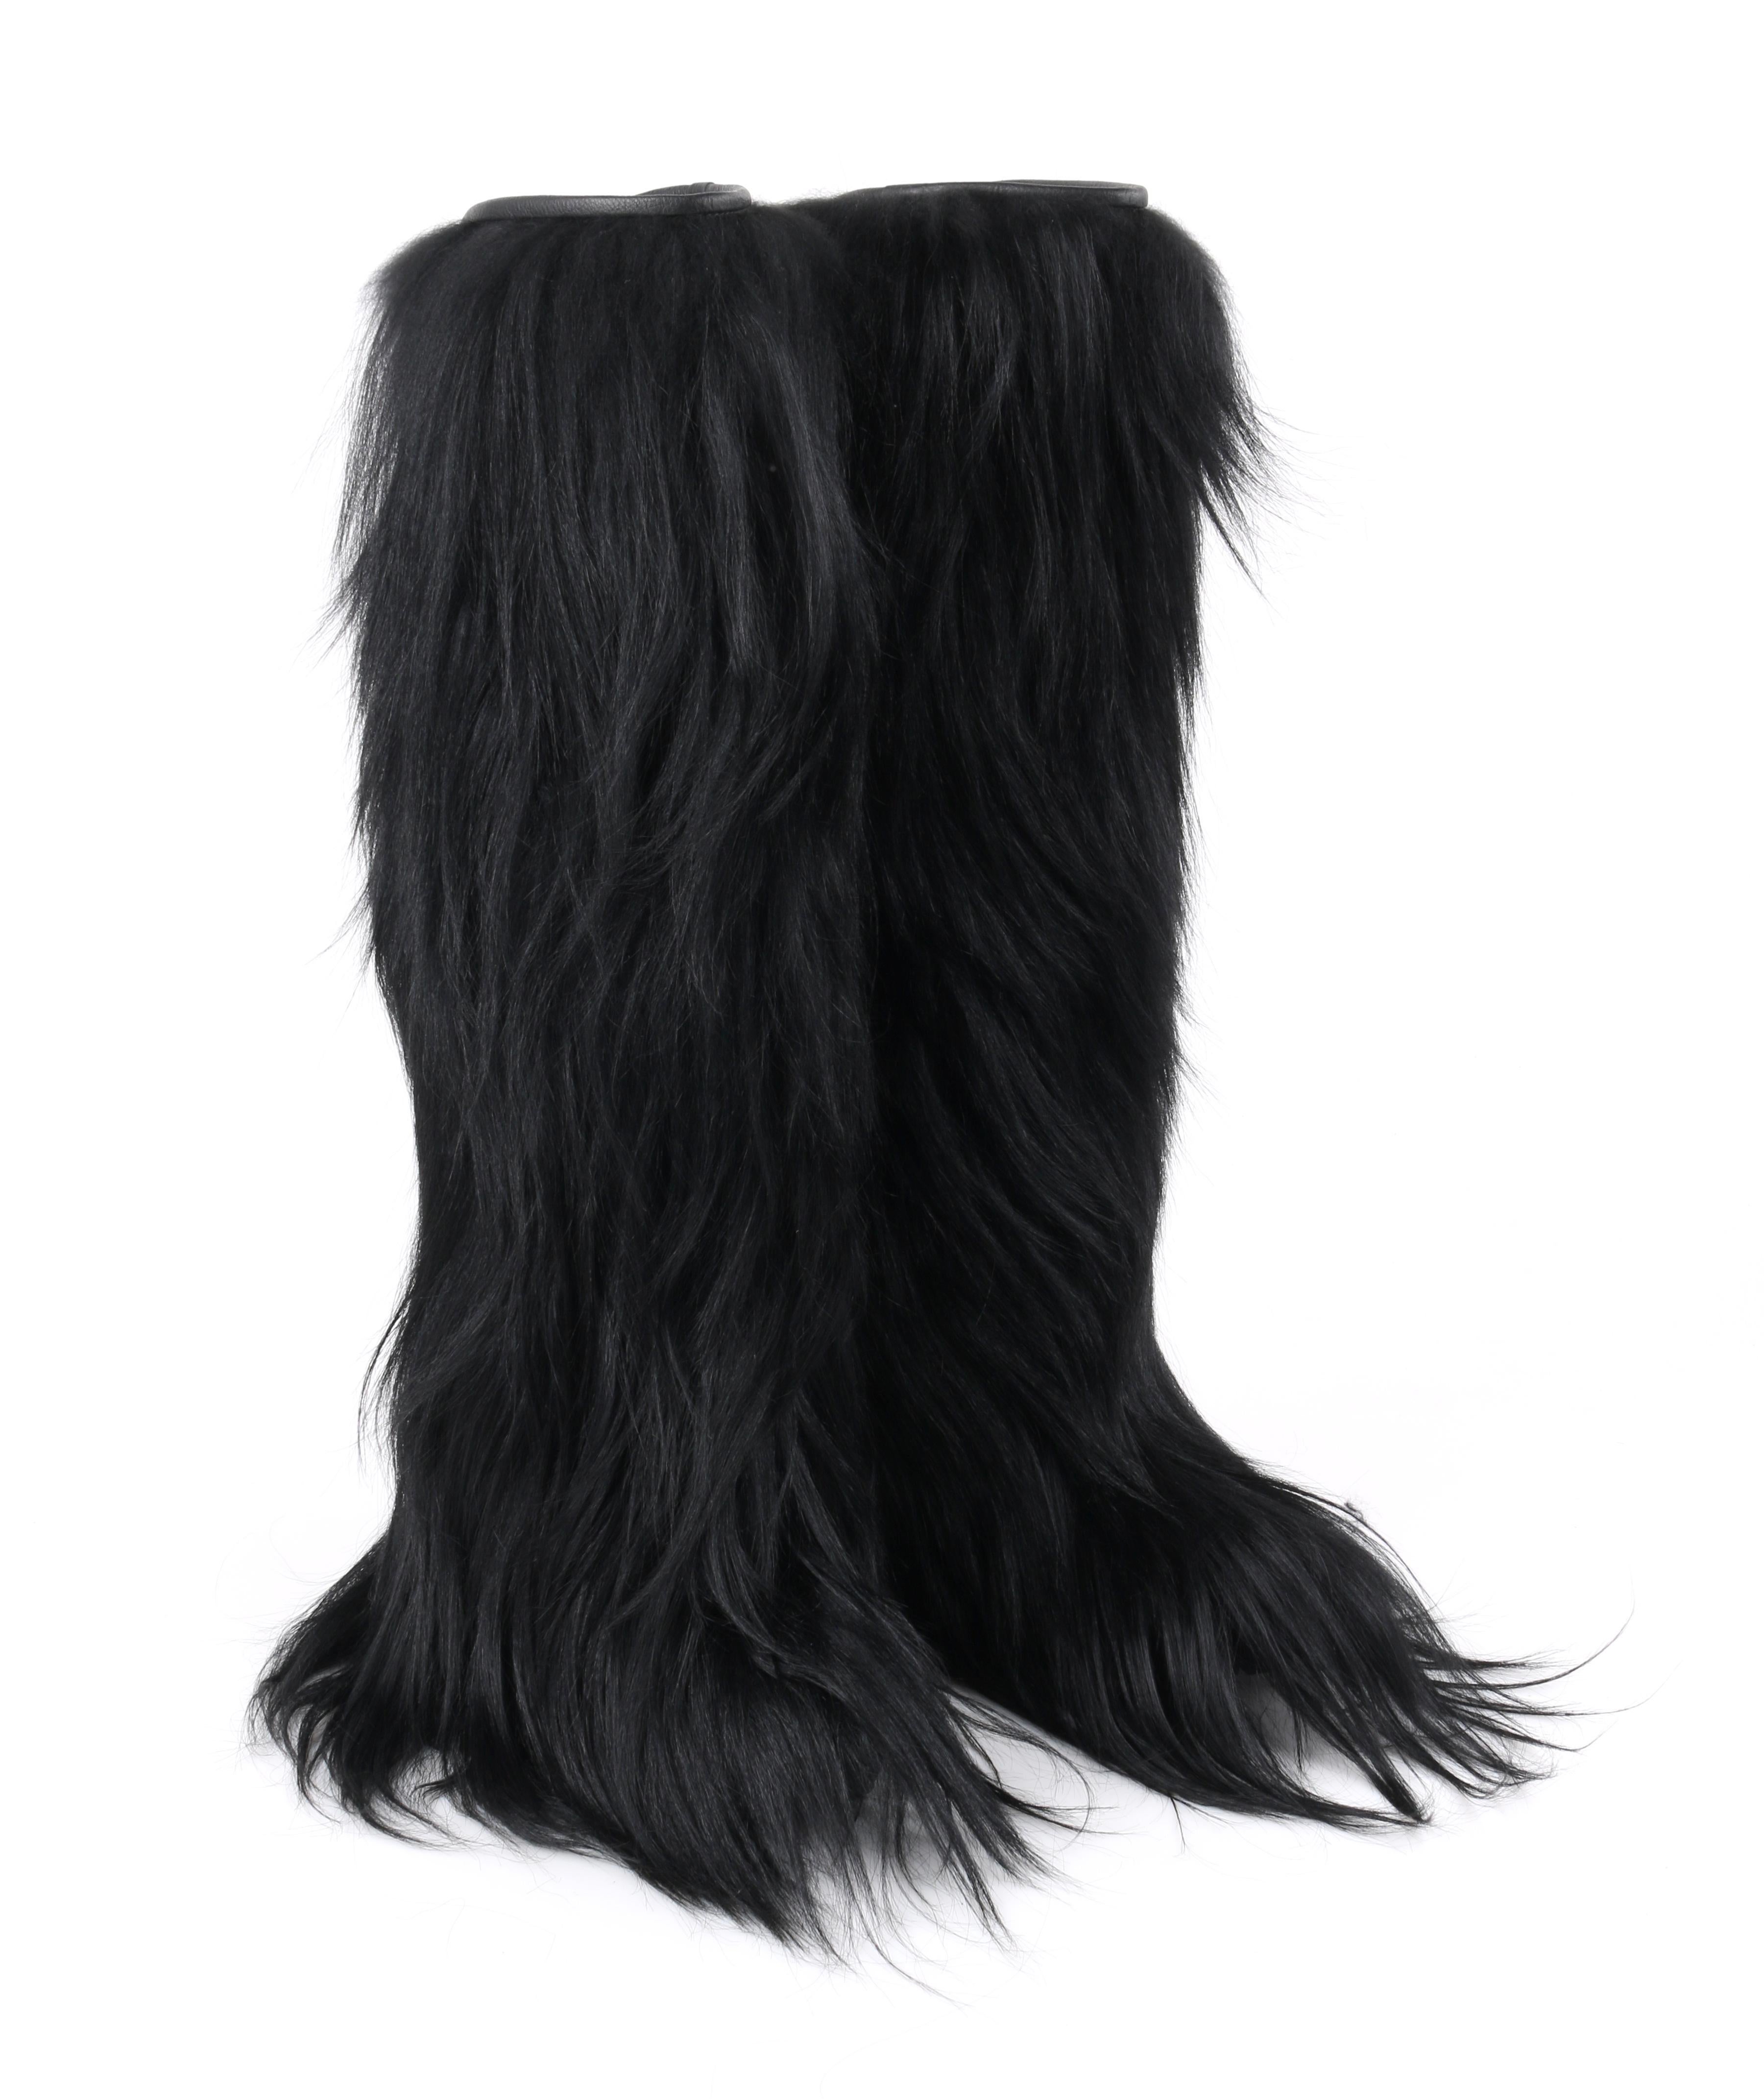 MONCLER c.2013 Black Goat Long Fur Over The Knee Winter Post-Ski Apres Boots RARE
 
Brand / Manufacturer: Moncler
Style: Boots
Color(s): Black
Marked Materials: Real Goat Fur; Capra 
Additional Details / Inclusions: Over the knee; long, shaggy black